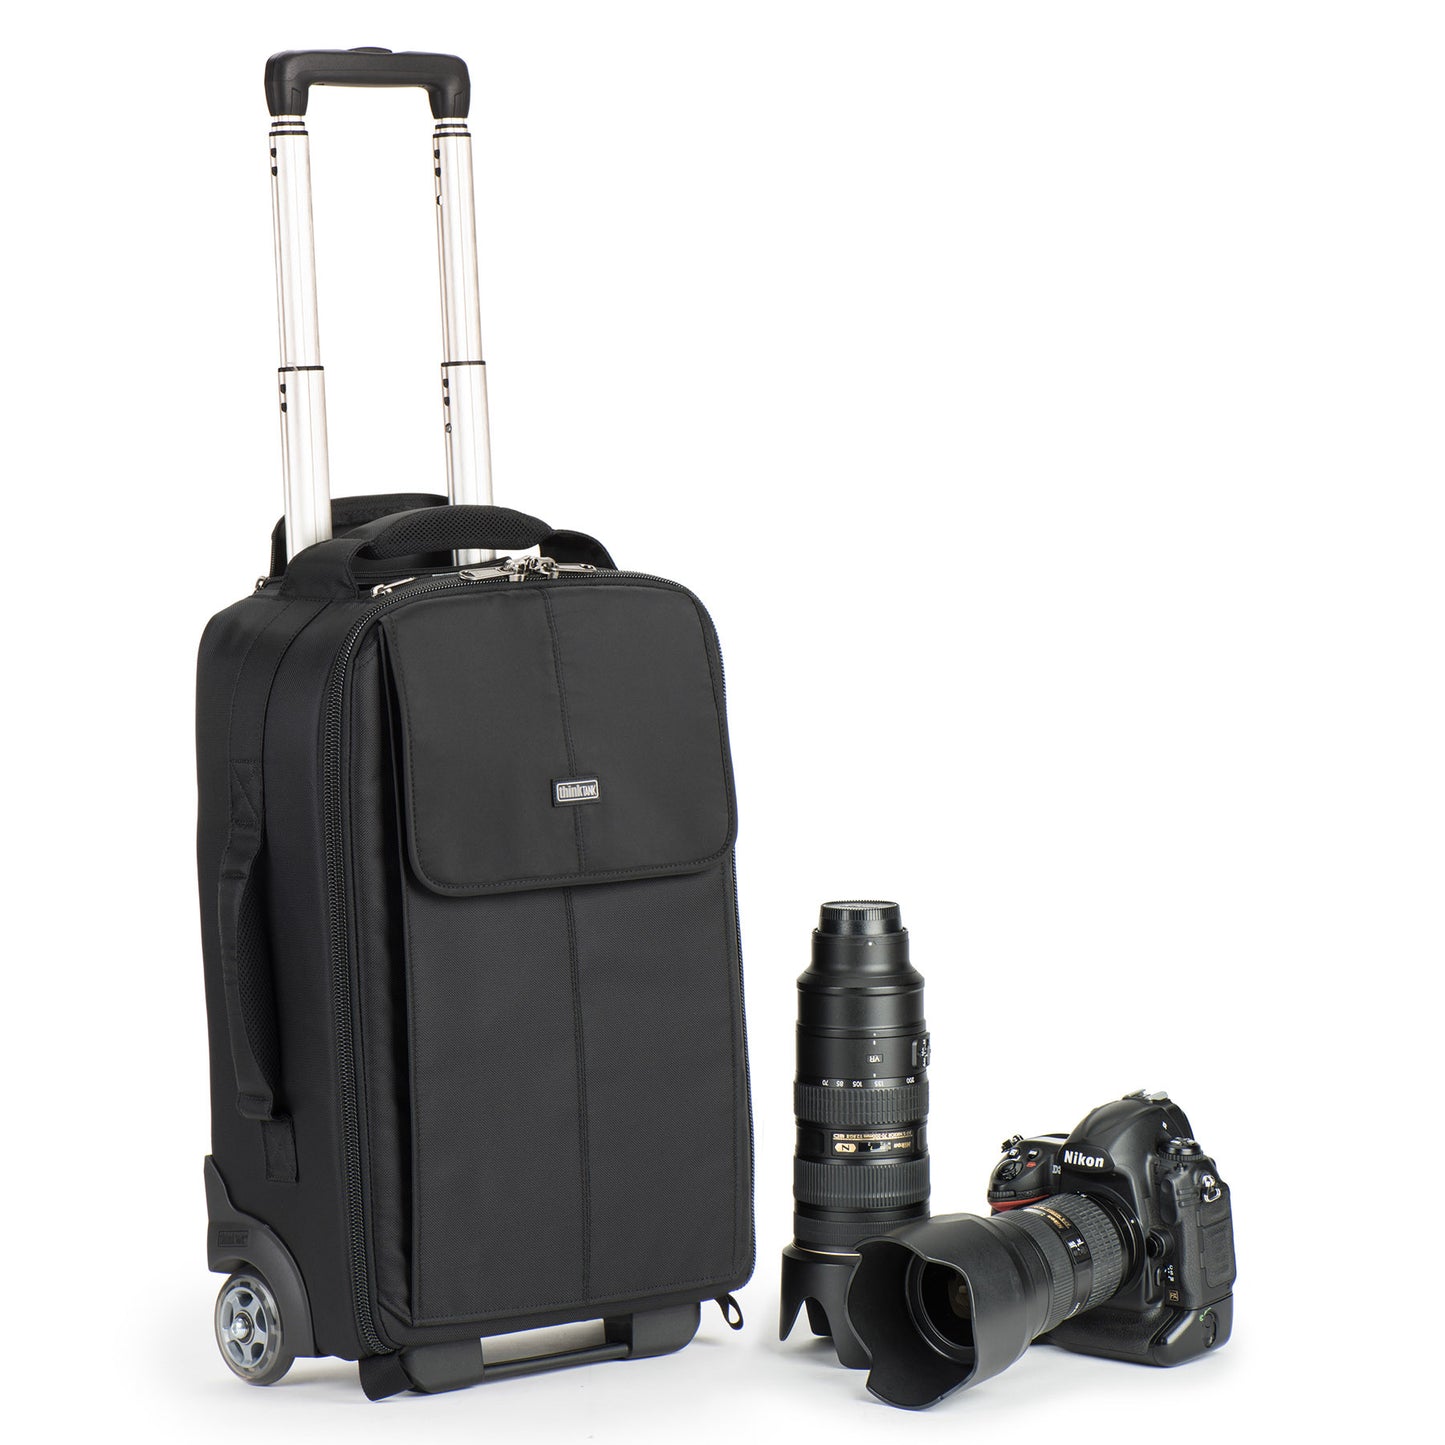 Specially designed interior to maximize gear for carry on for small aircraft such as commuter and regional jets. Meets U.S. and international airline carry on requirements